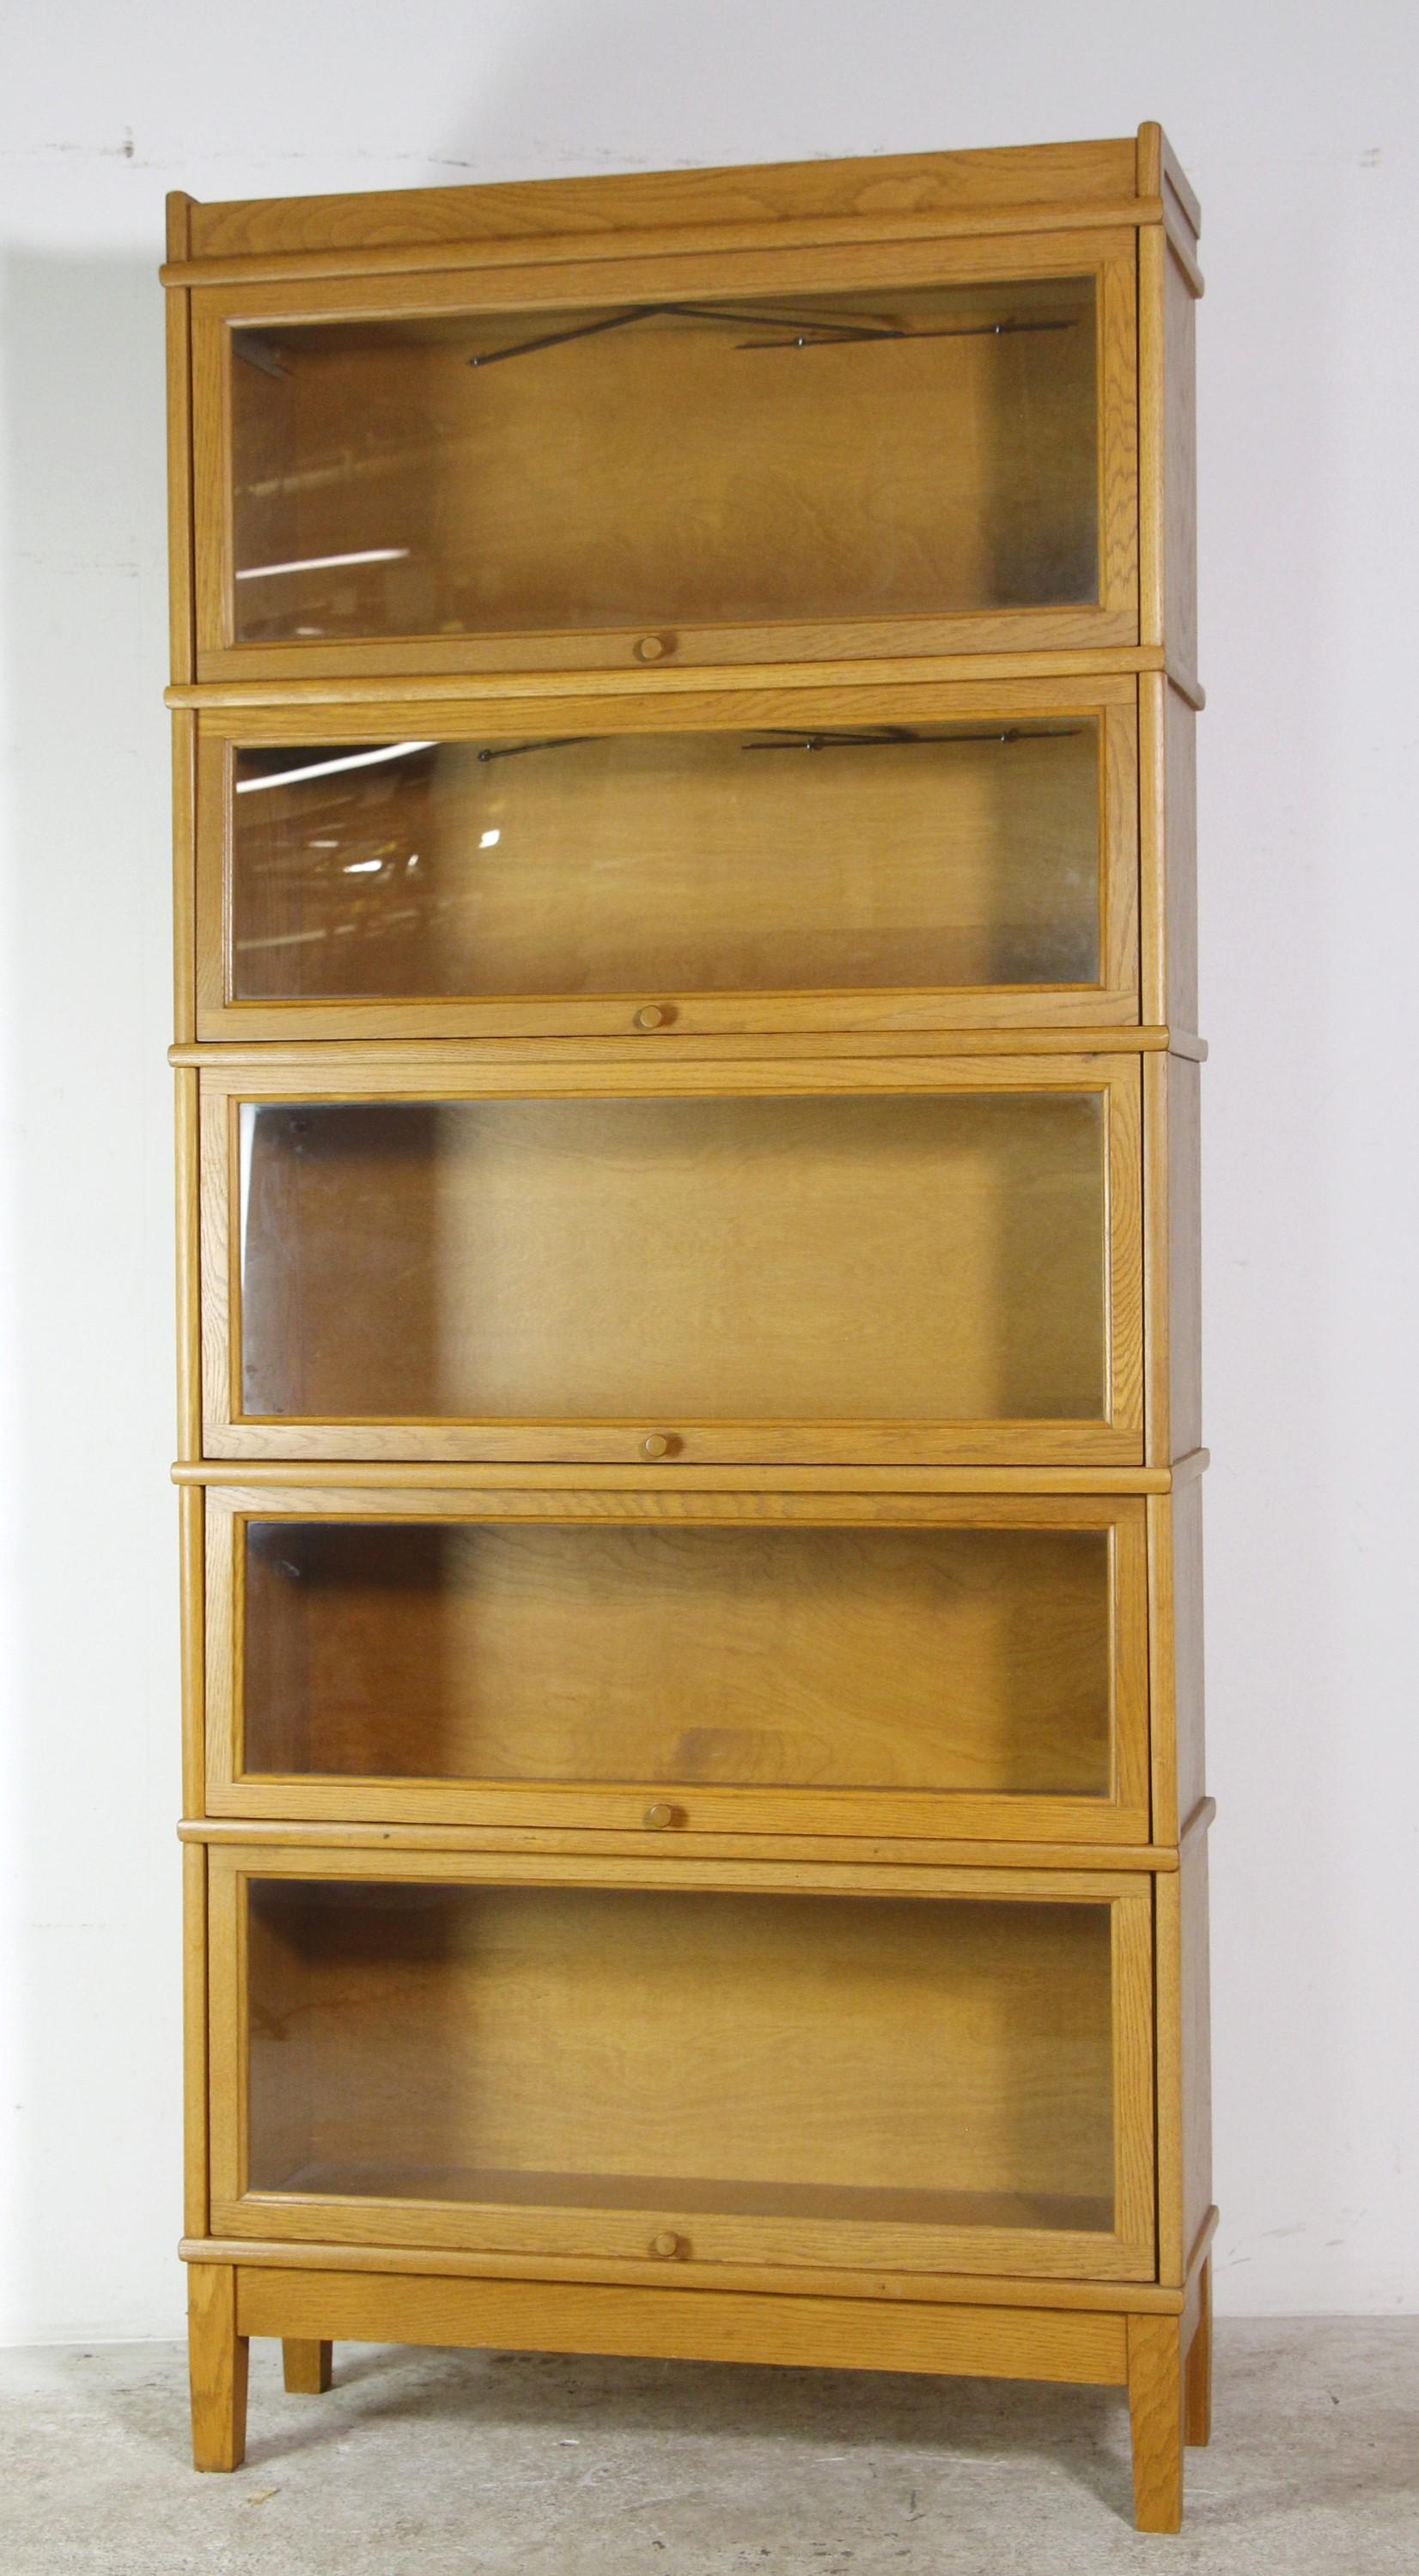 Antique solid oak barrister bookcase, five sections with glass pull-down doors. The glass front doors have wooden knobs and are in good working condition. The original glass is intact. Please note, this item is located in one of our NYC locations.